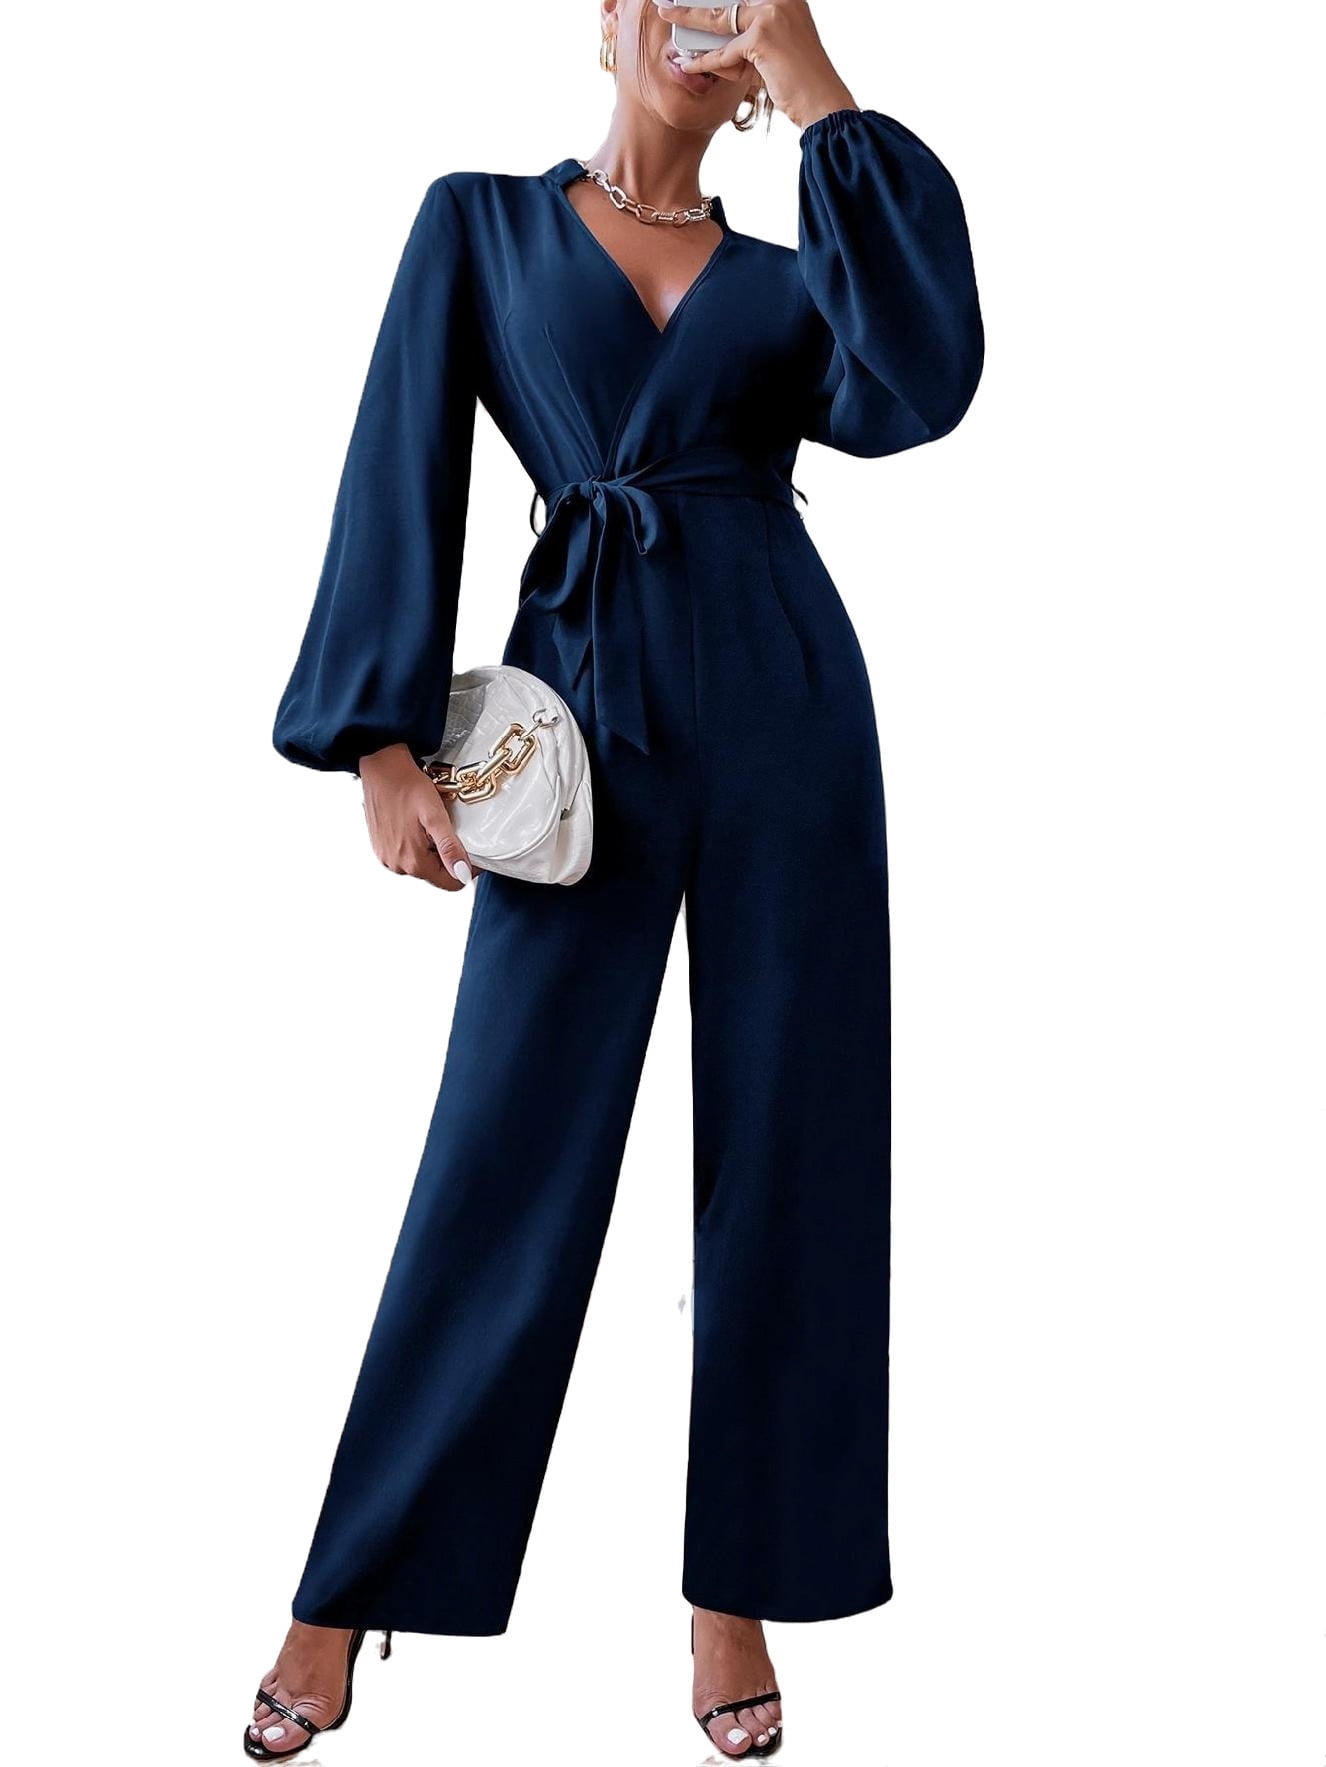 Stylish Navy Blue and Silver Jumpsuit with Accessories